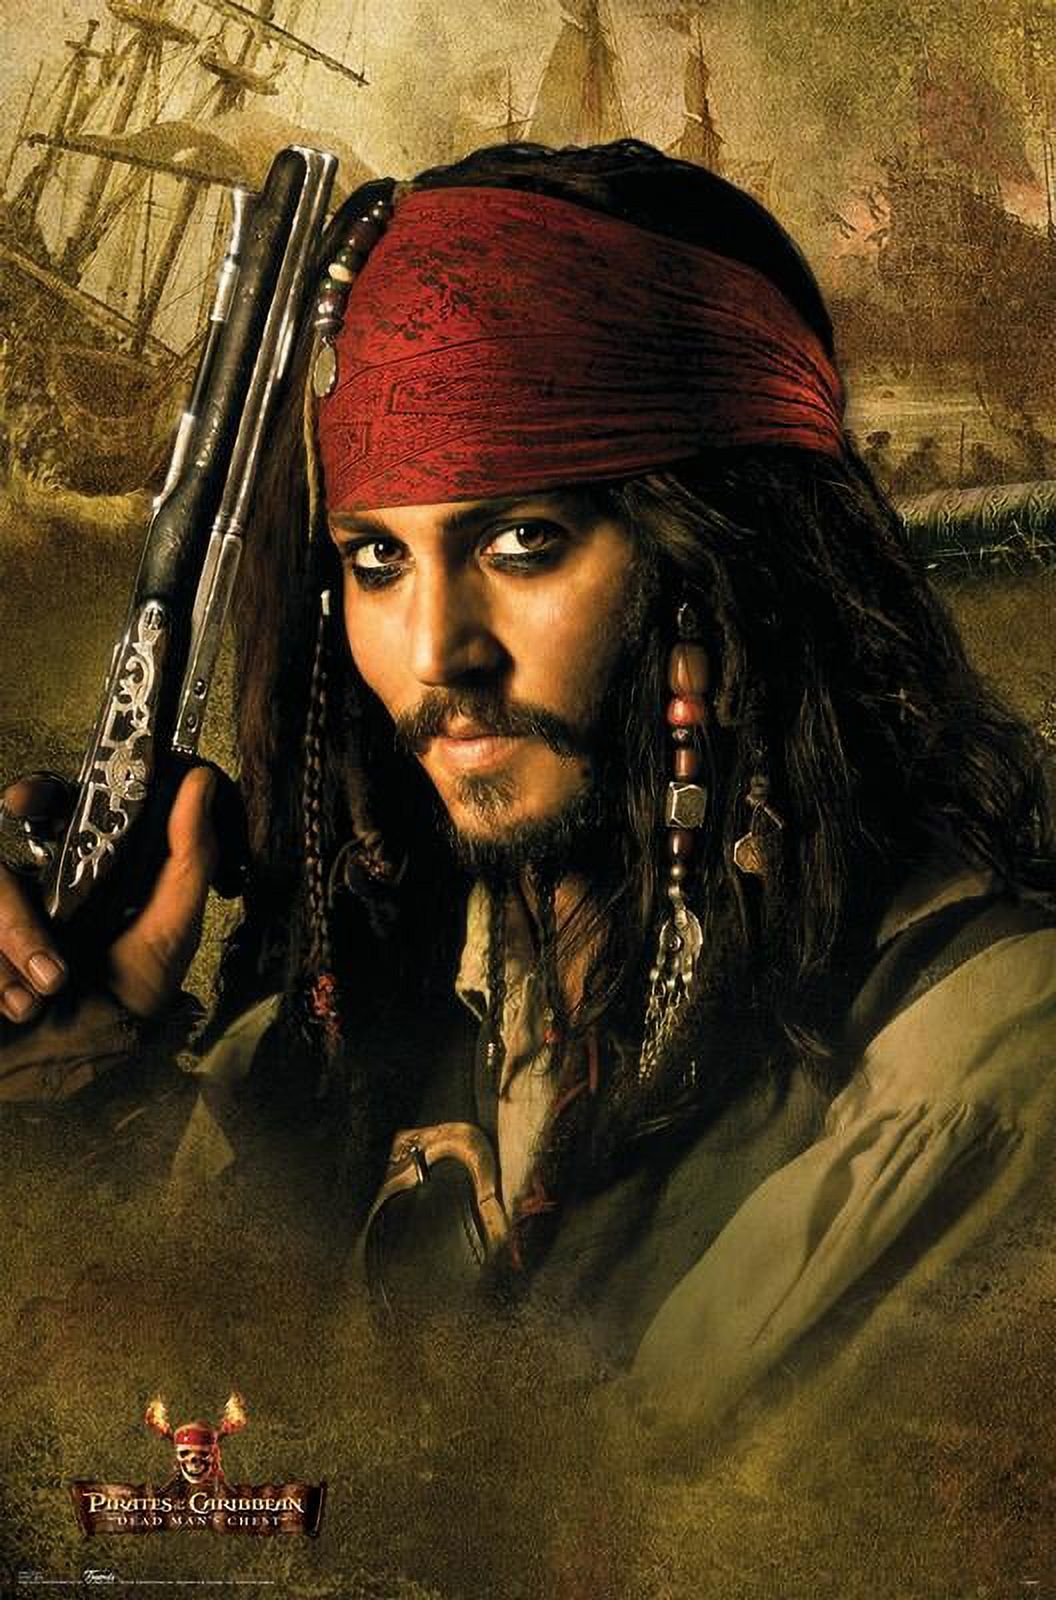 Disney Pirates of the Caribbean: Dead Man's Chest - Johnny Depp Wall Poster, 22.375" x 34" - image 1 of 2